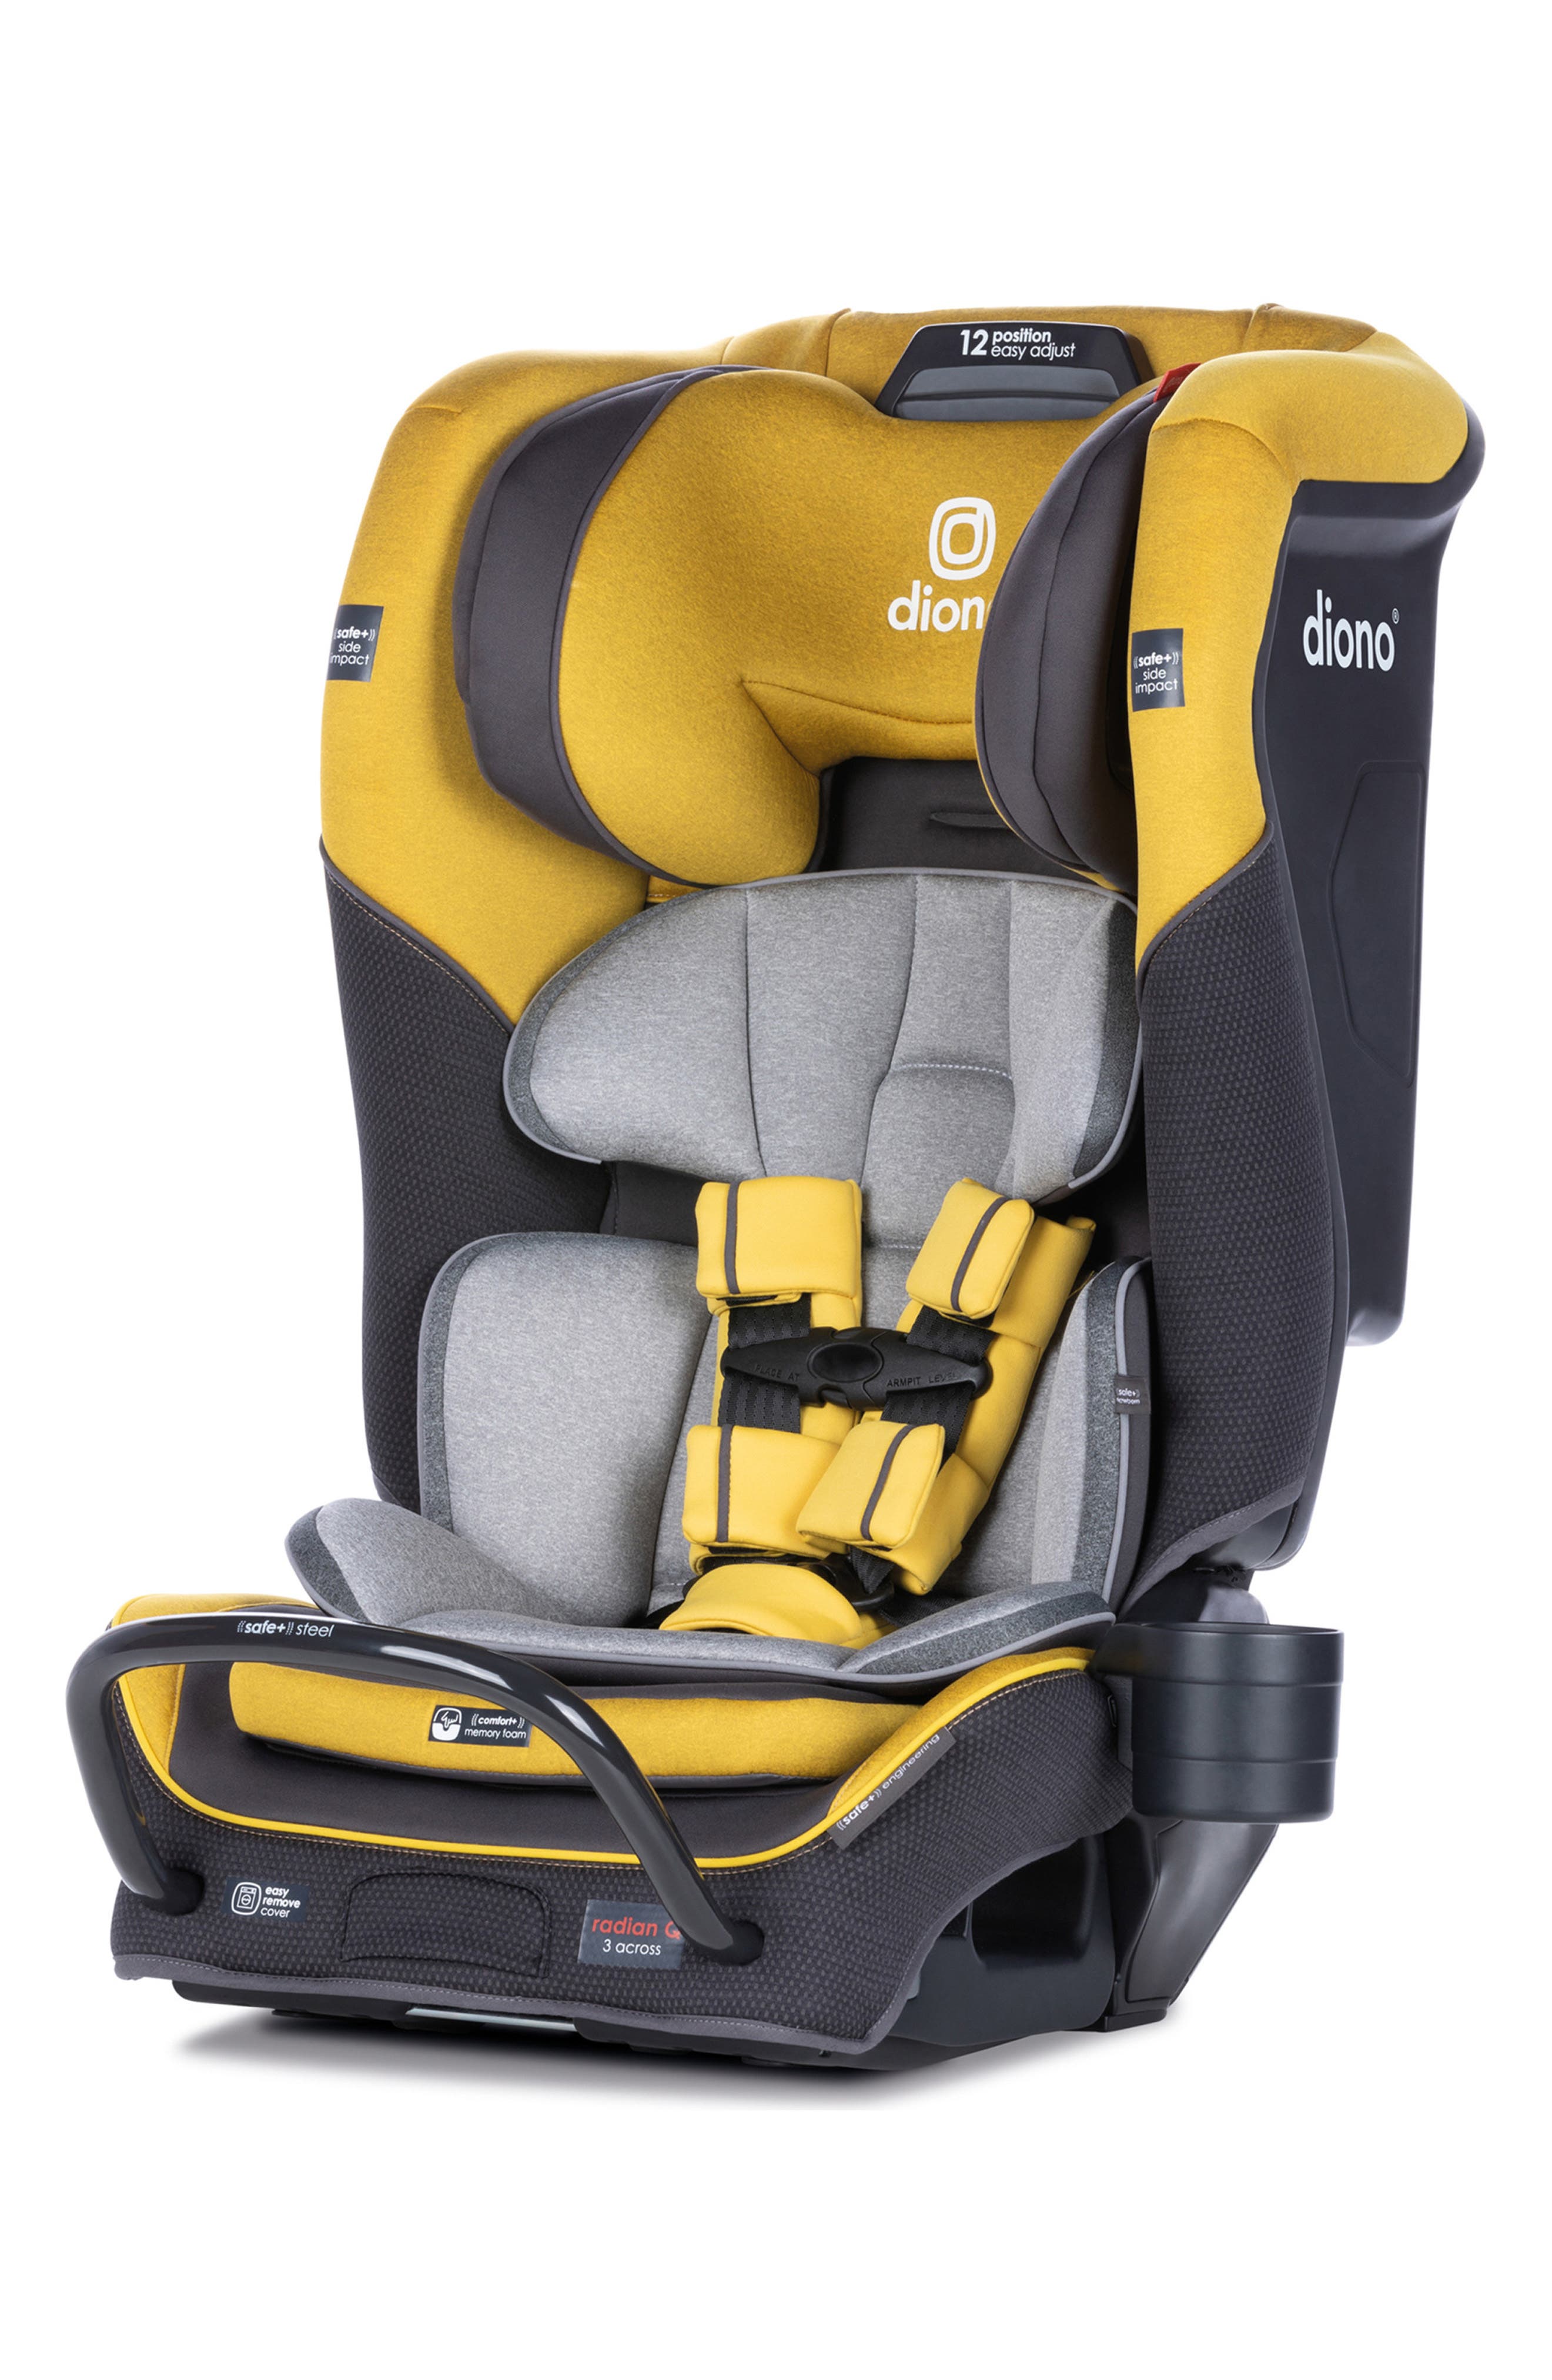 Diono radian(R) 3QX All-in-One Convertible Car Seat in Yellow Mineral